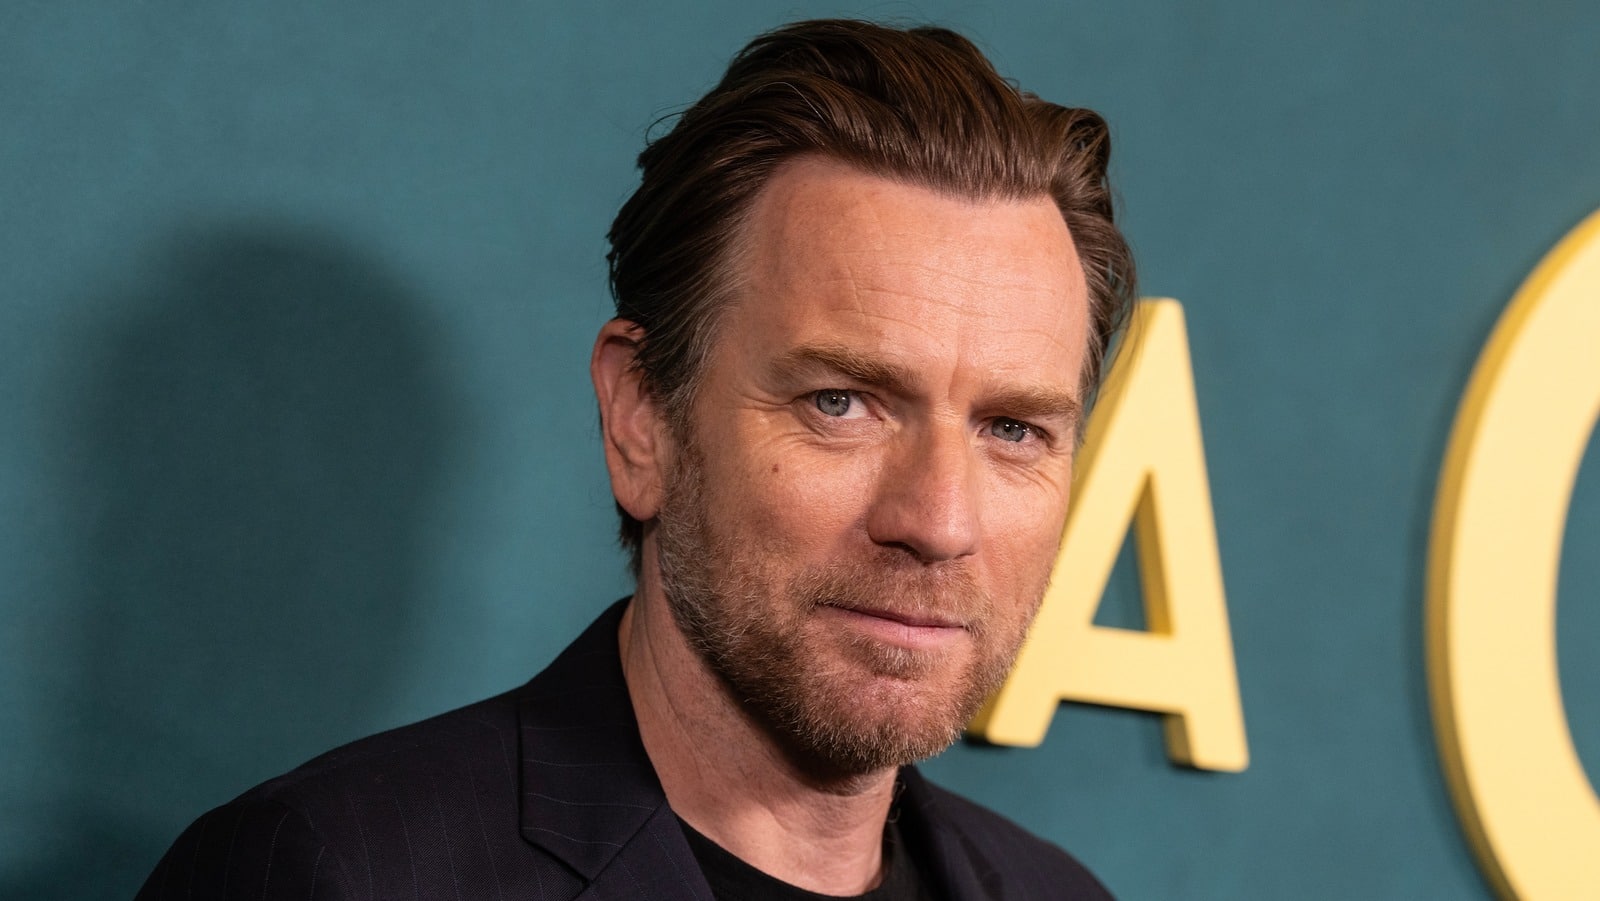 Ewan McGregor Refuses To Wear One Thing In His Movies & TV Shows 24